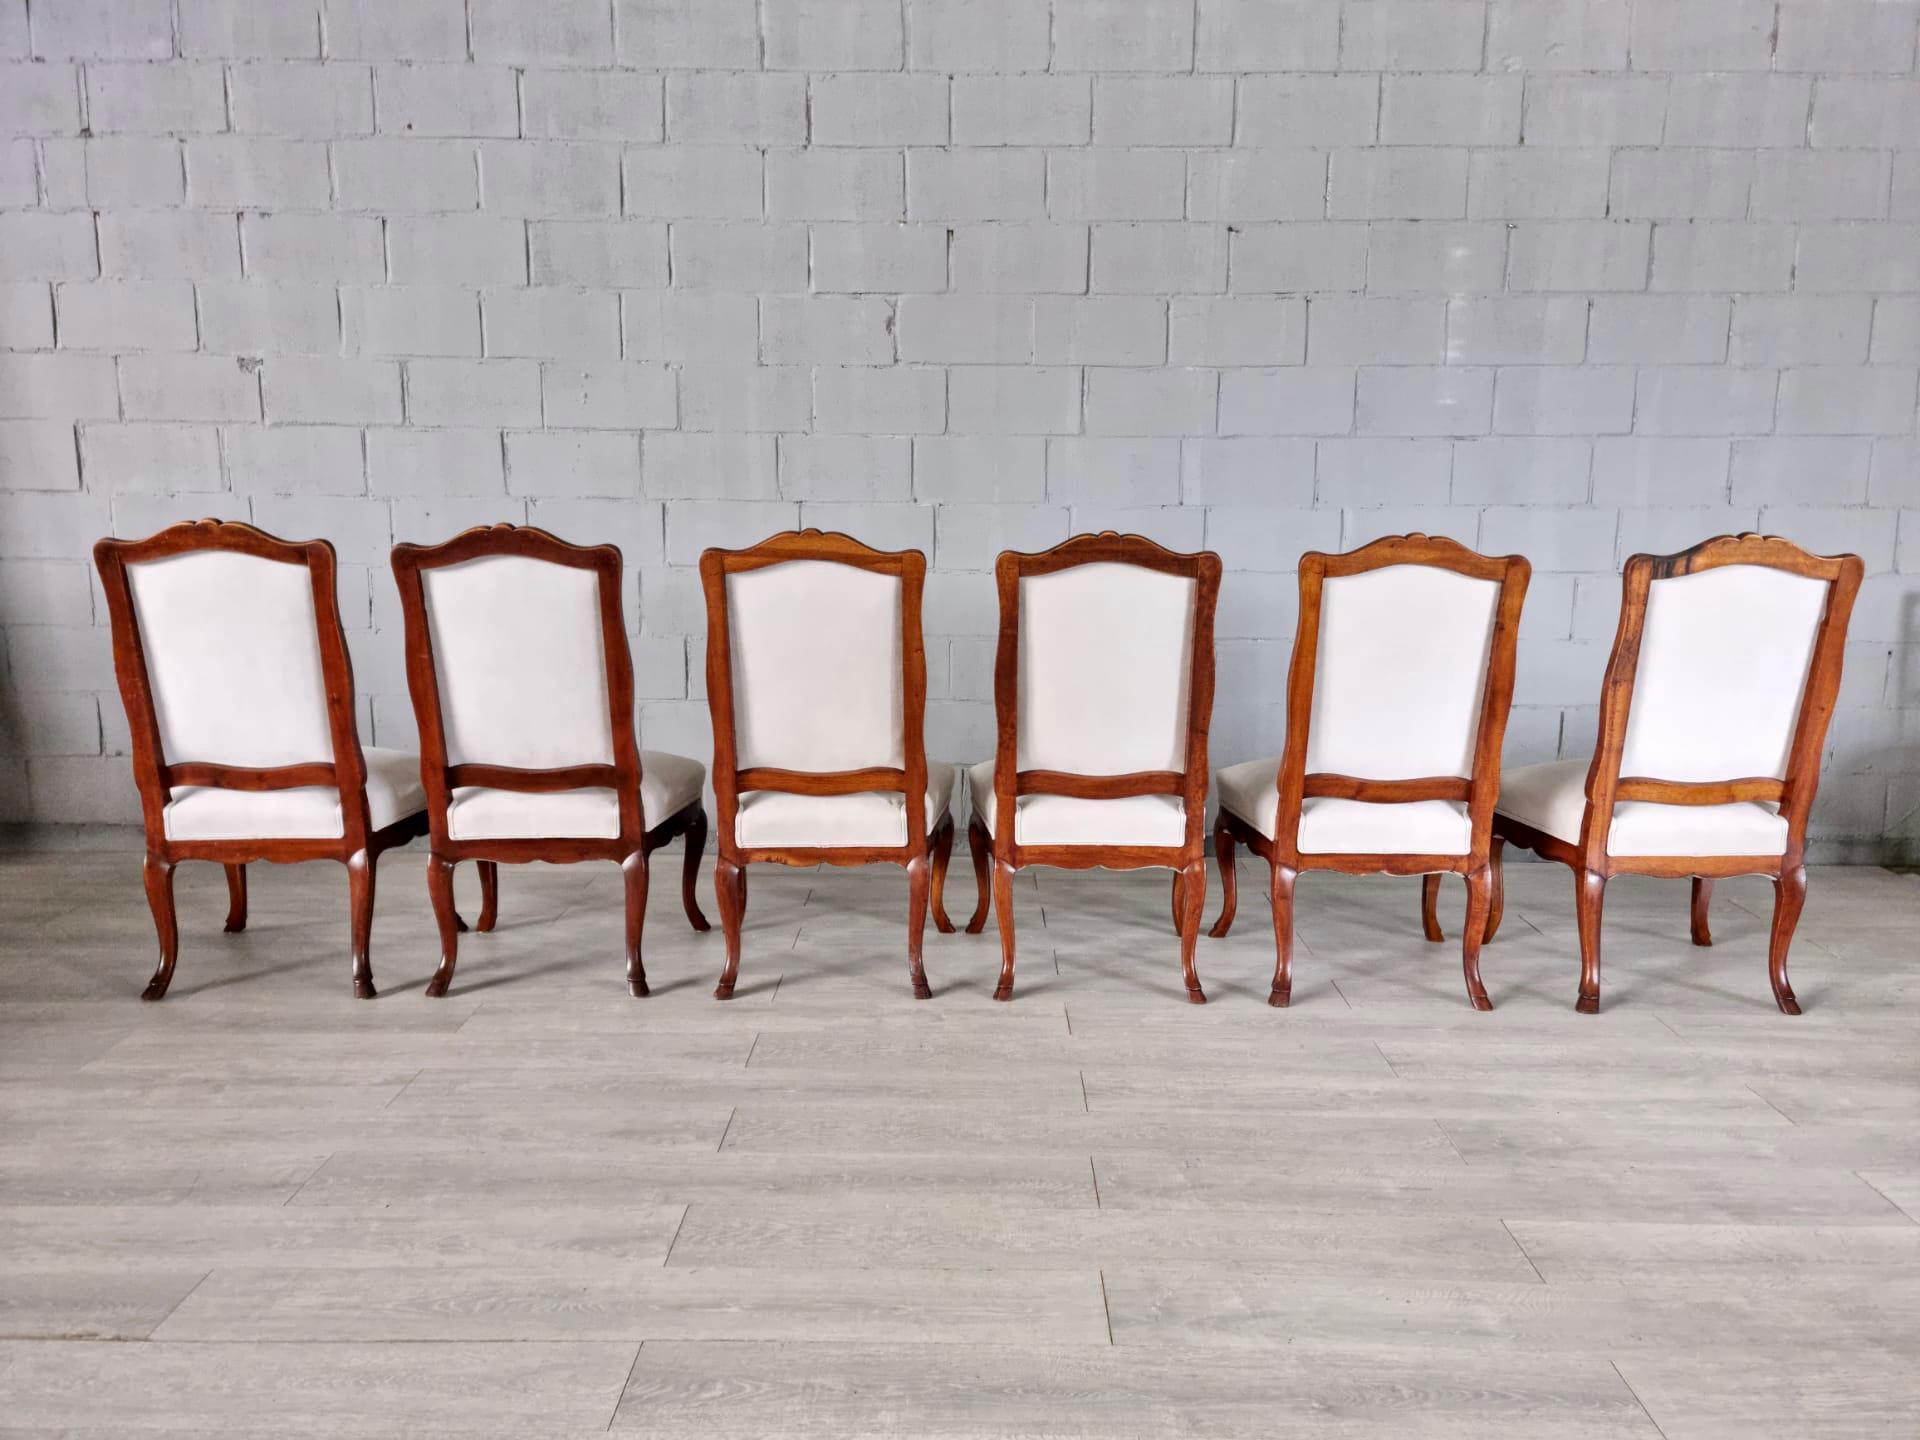 Reupholstered Antique French Louis XV Style Dining Chairs - Set of 6 For Sale 7